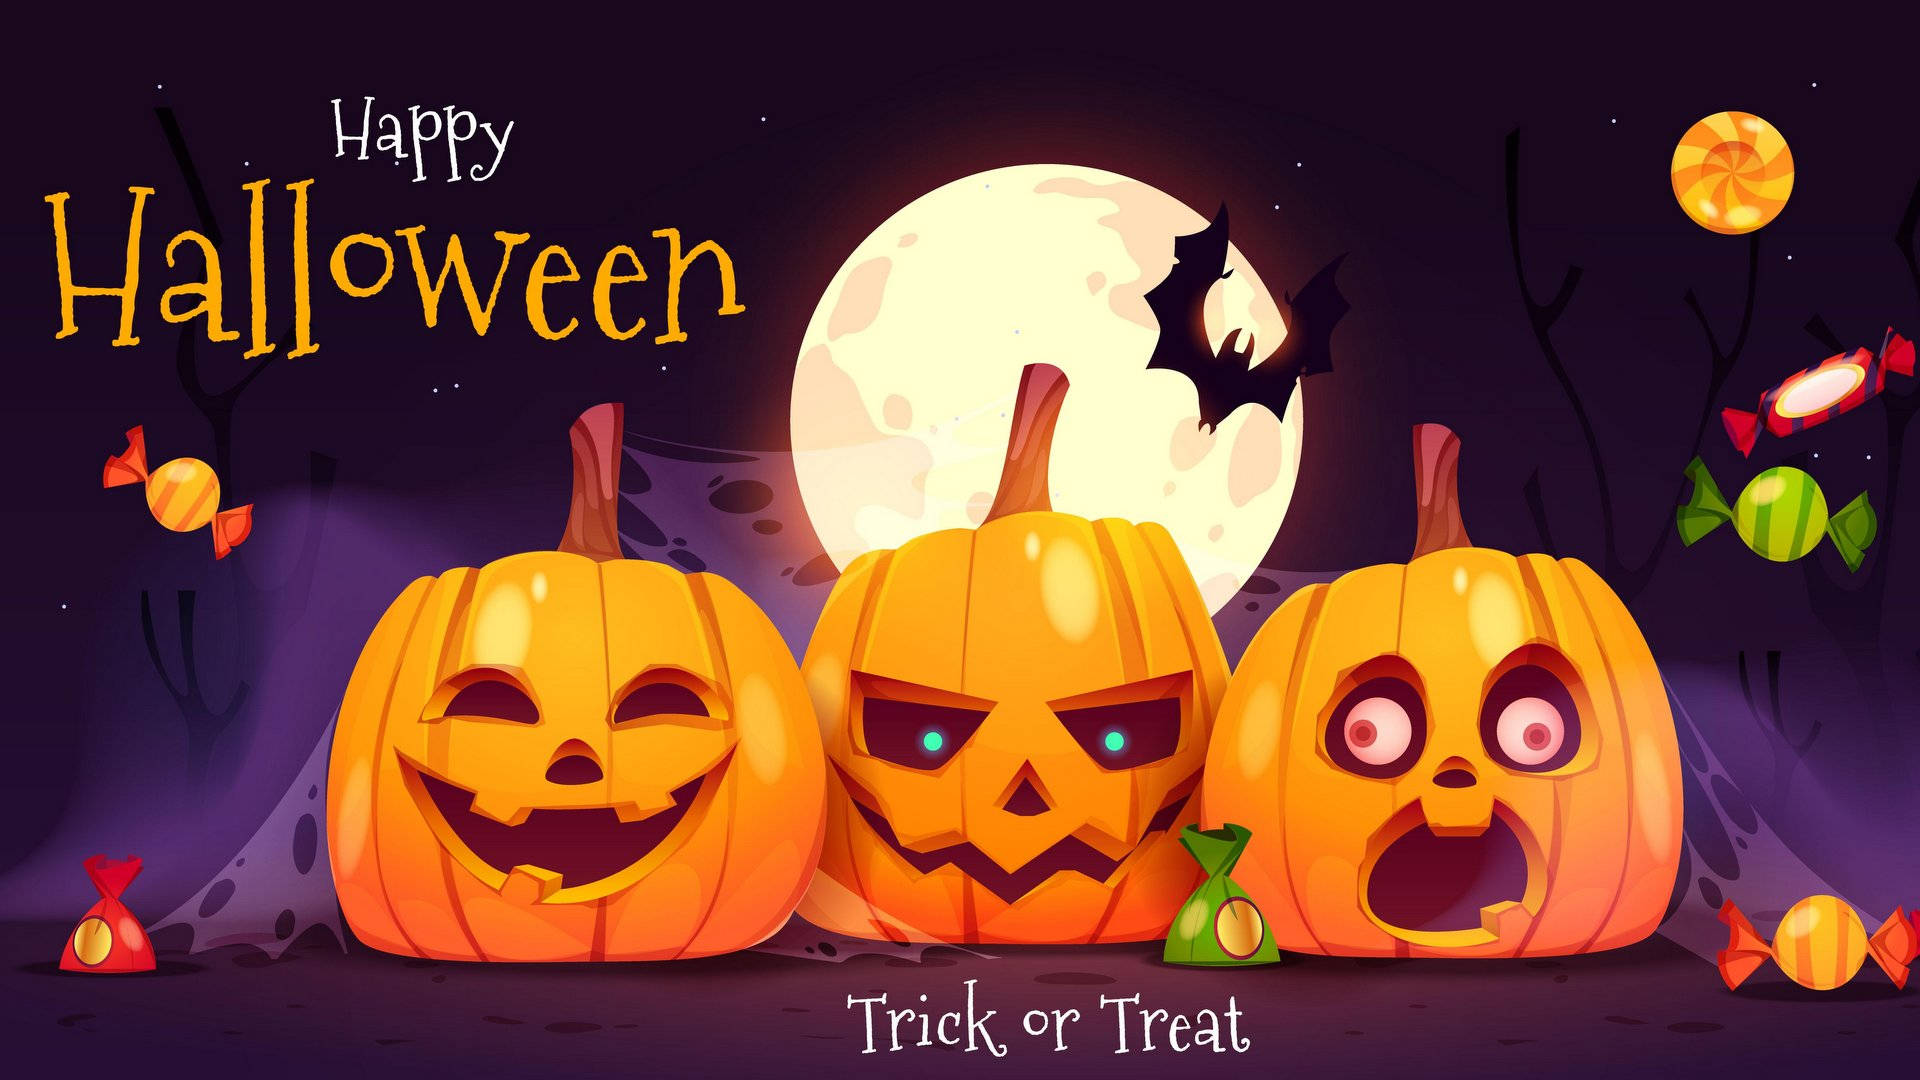 Get ready to trick or treat this Halloween! Wallpaper